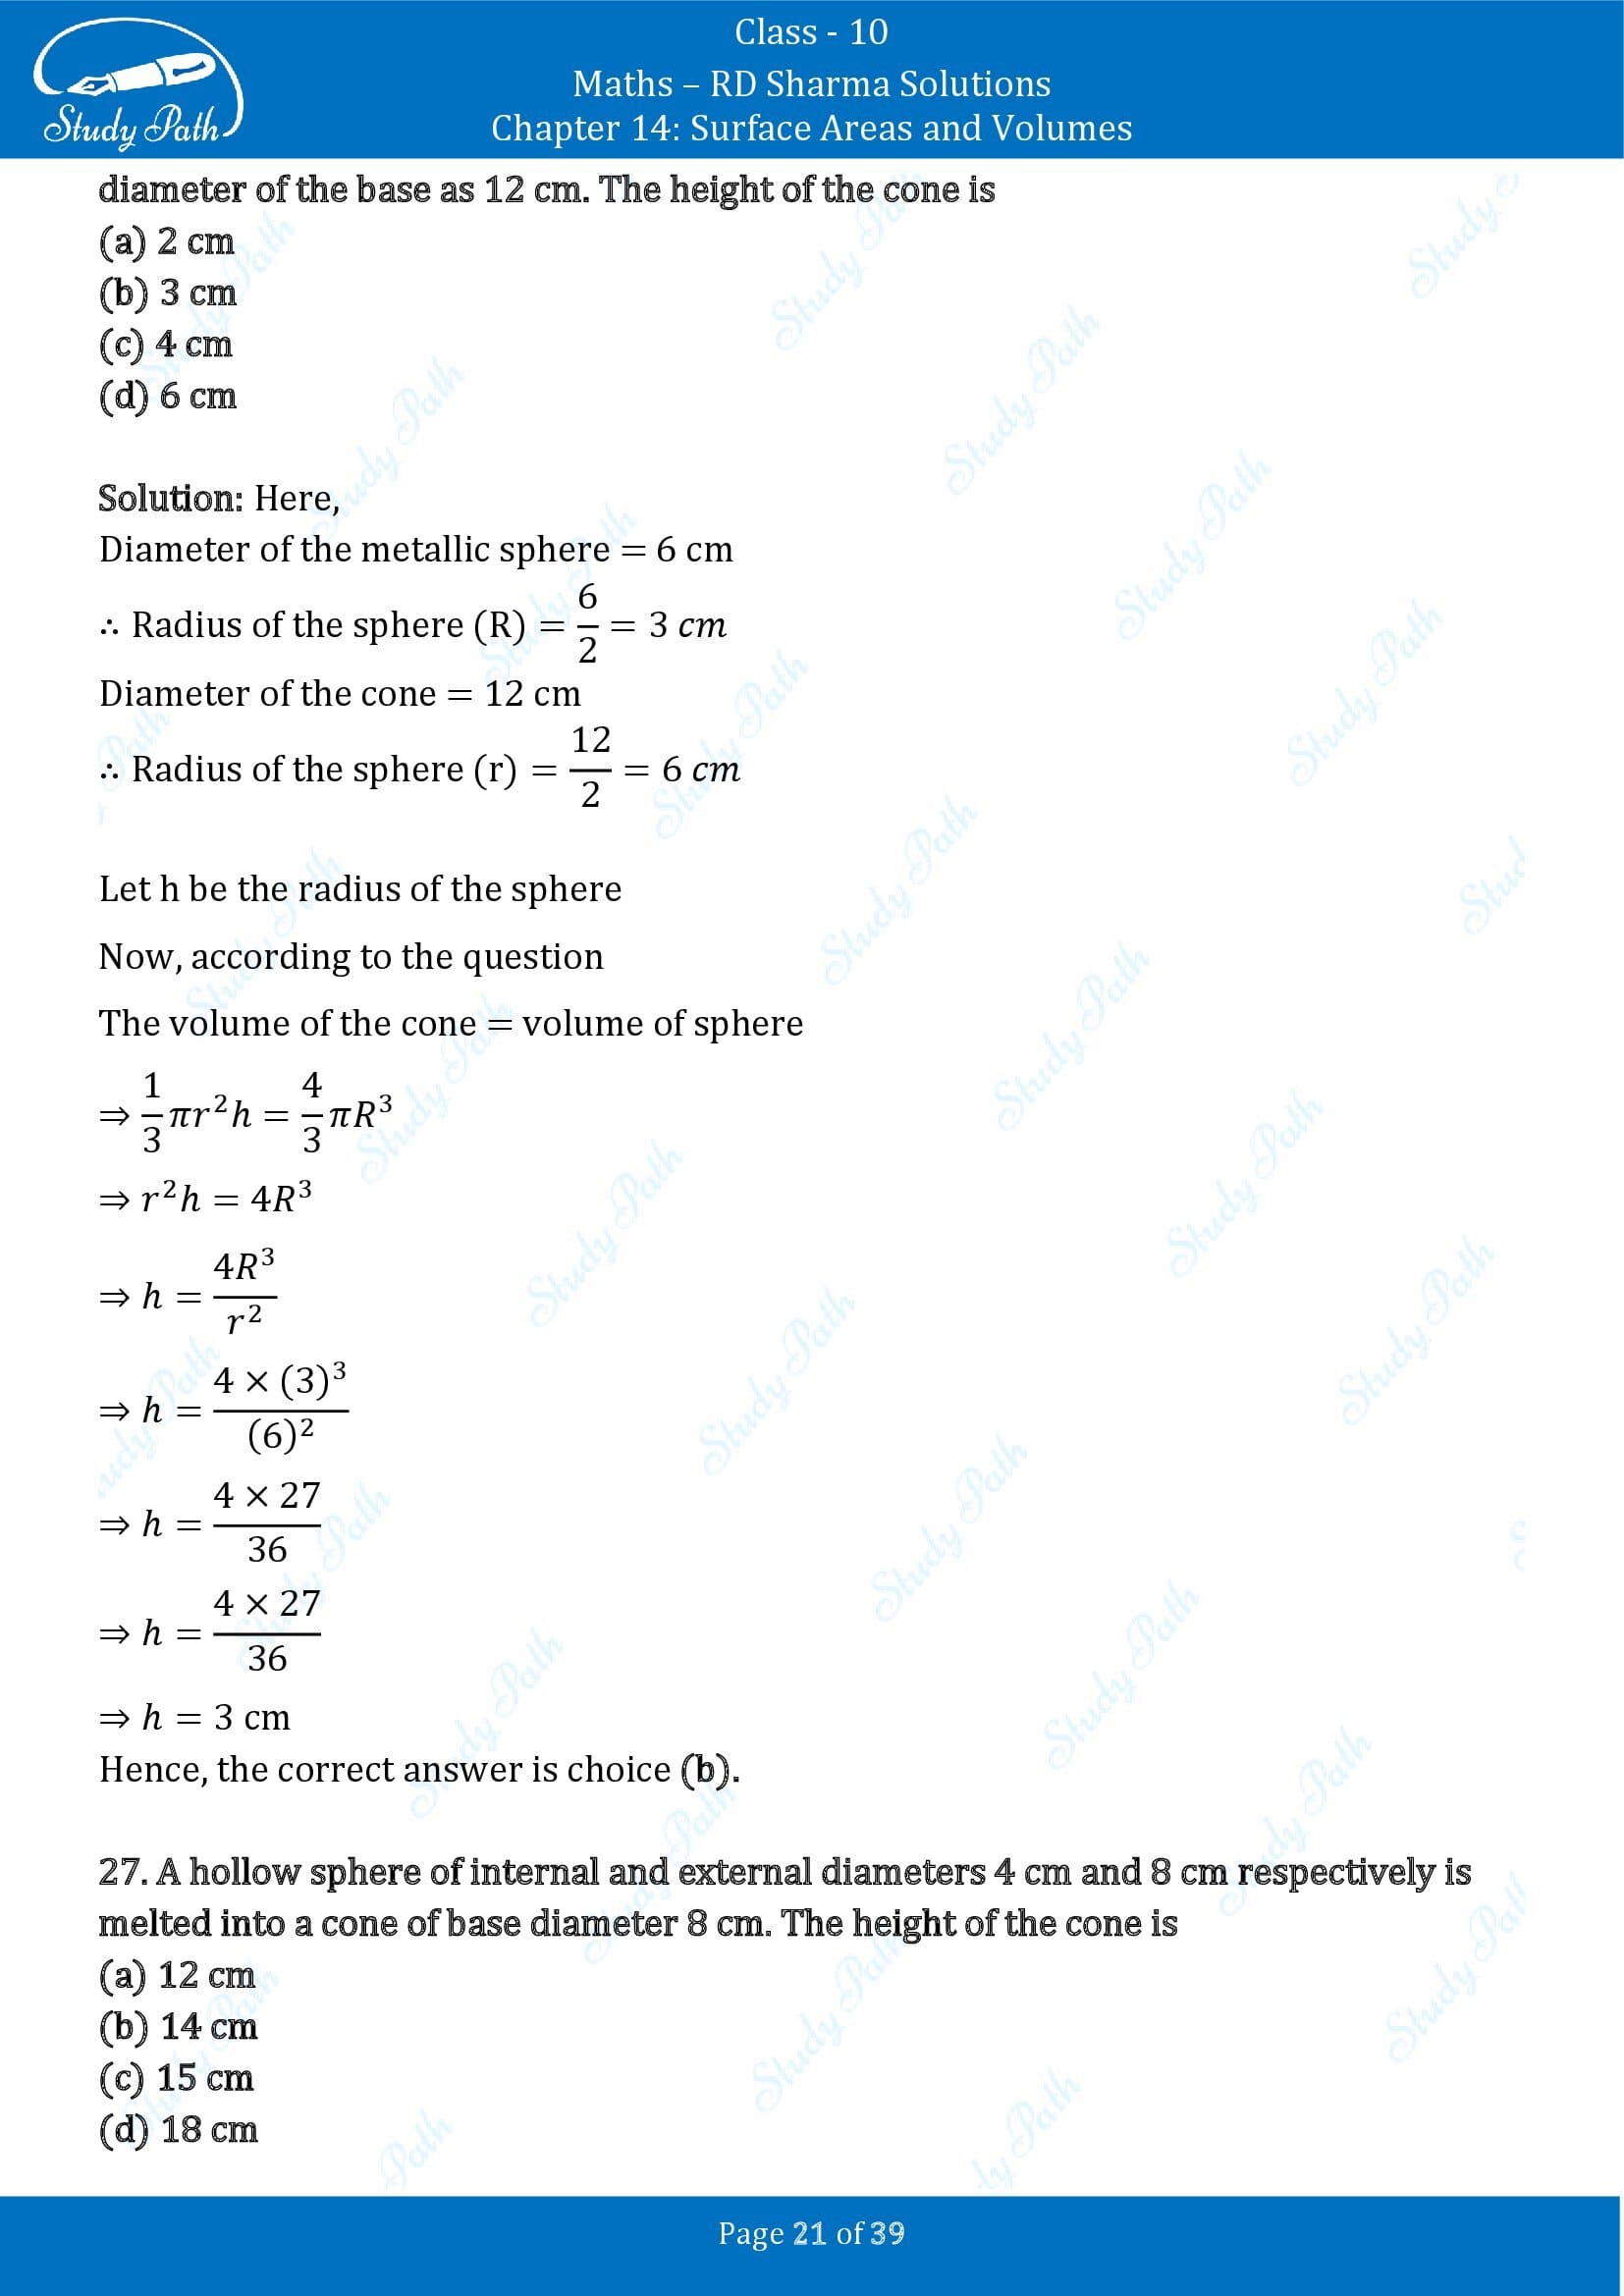 RD Sharma Solutions Class 10 Chapter 14 Surface Areas and Volumes Multiple Choice Question MCQs 00021